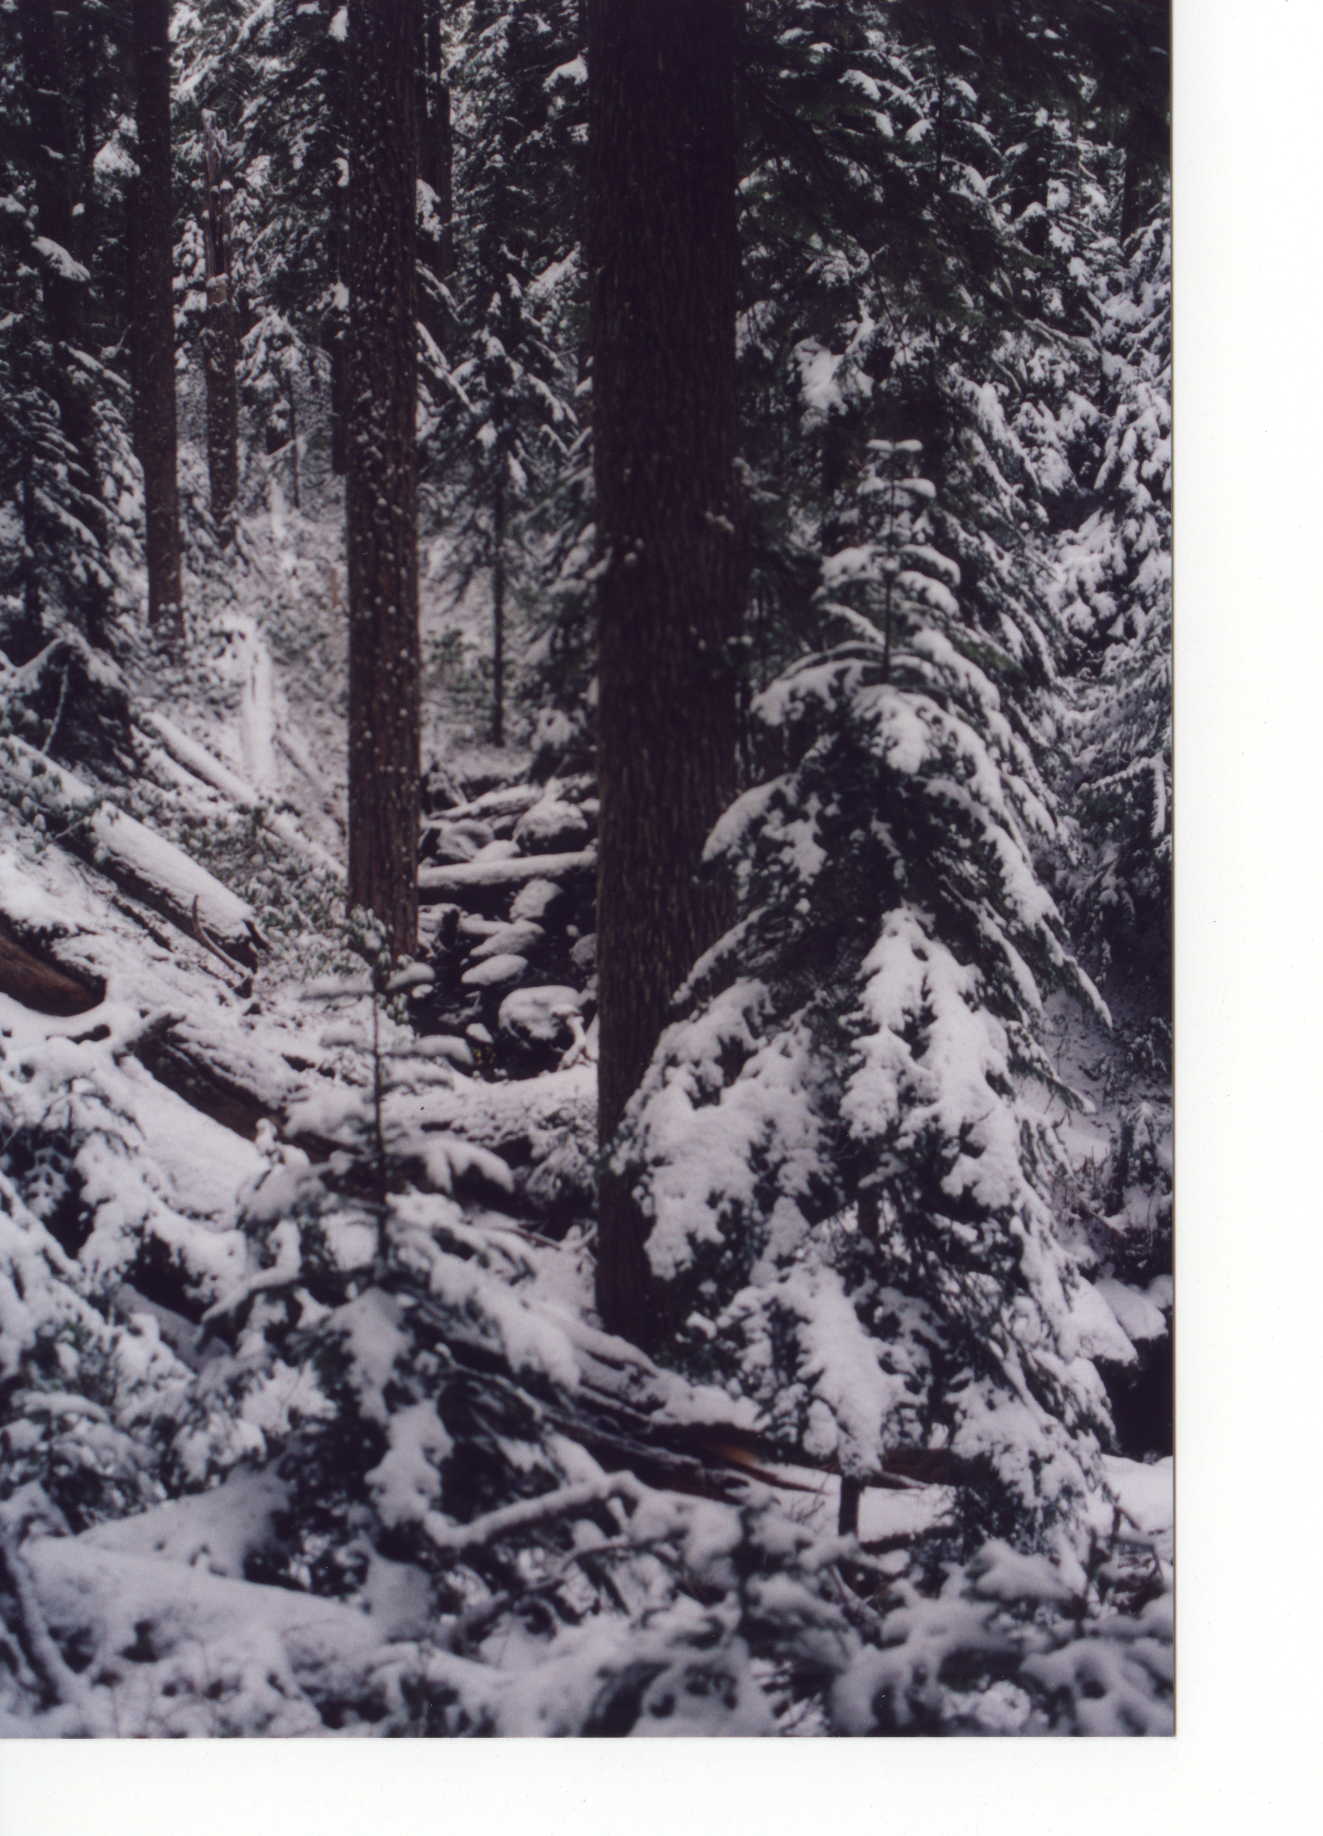 This is a snowy forest in a riparian area.